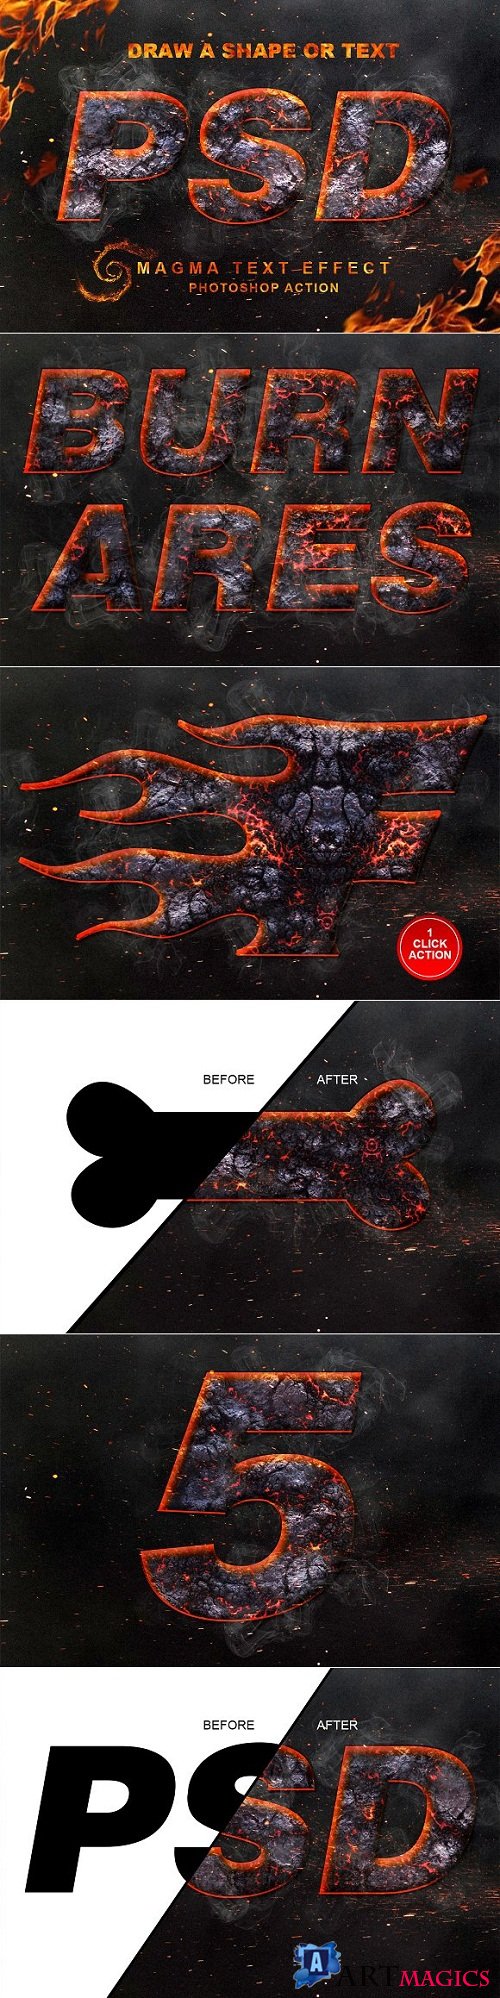 Magma Text Effect Photoshop Action - 2853357